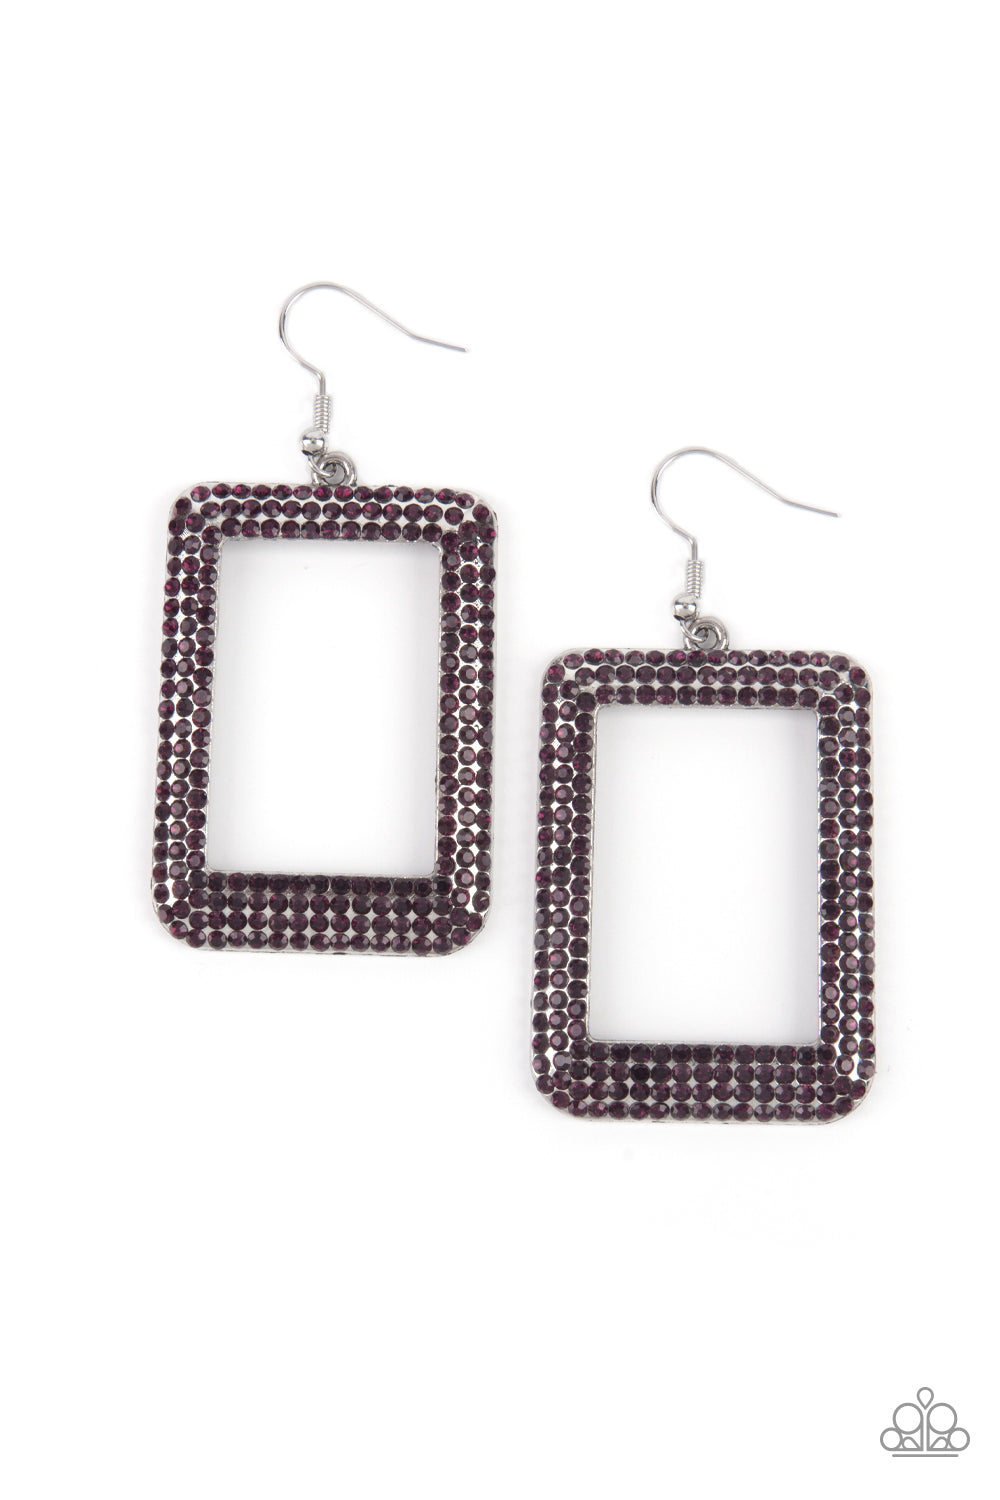 Paparazzi Accessories - Bordered in rows of glittery purple rhinestones, an oversized silver rectangular frame swings from the ear for a fashionable finish. 